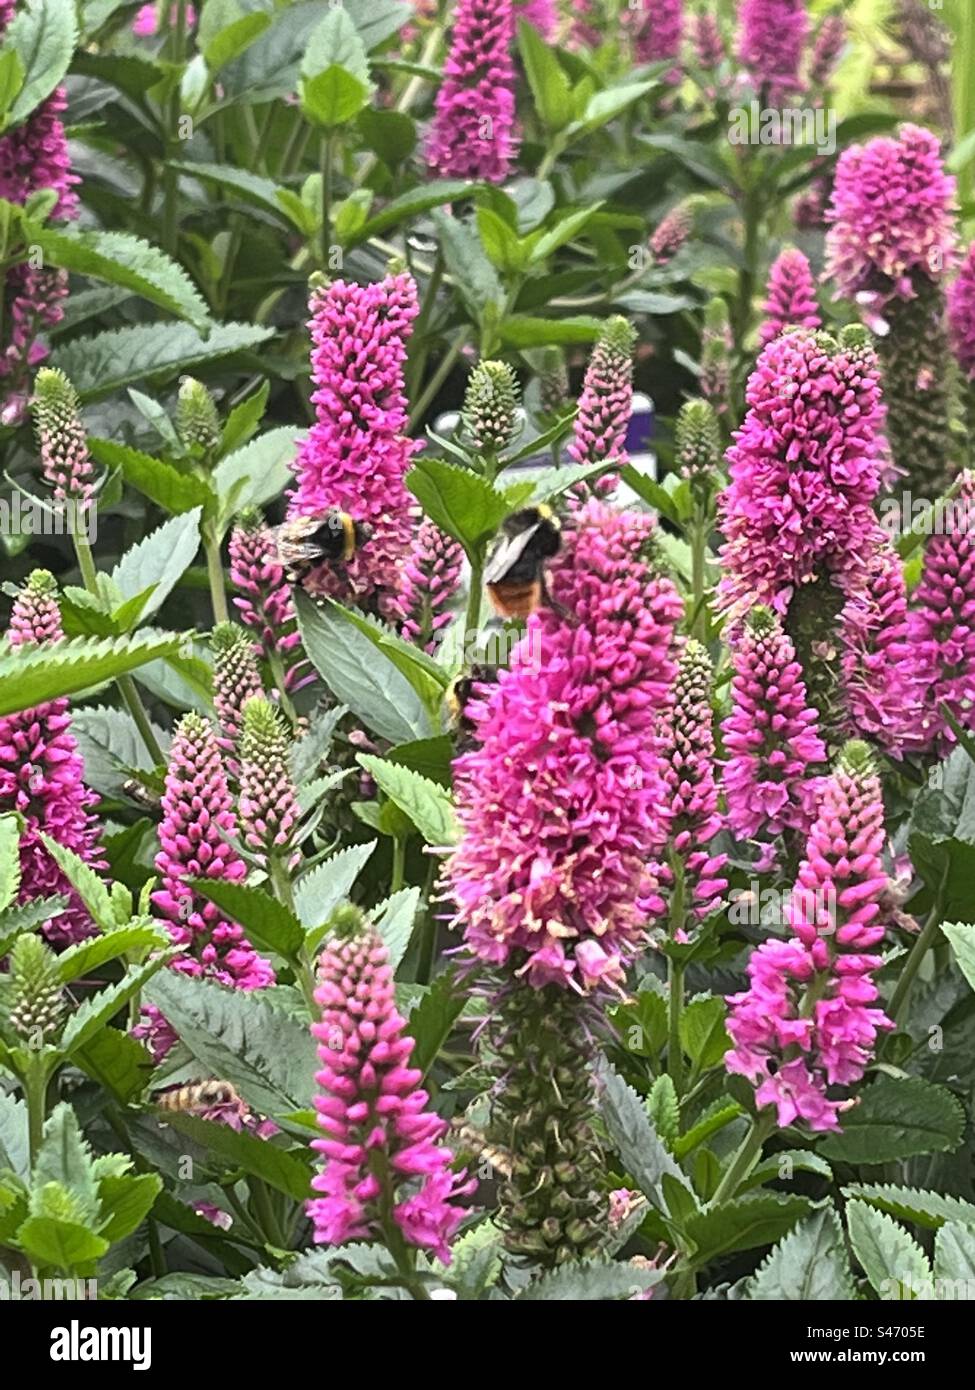 Bumble Bees feeding on pink spiked speedwell, Veronica Spicata flowering plant, part of the plantaginaceae family & grows between 1-3feet tall. Photo taken at Trentham Water Gardens, Stoke-On-Trent Stock Photo